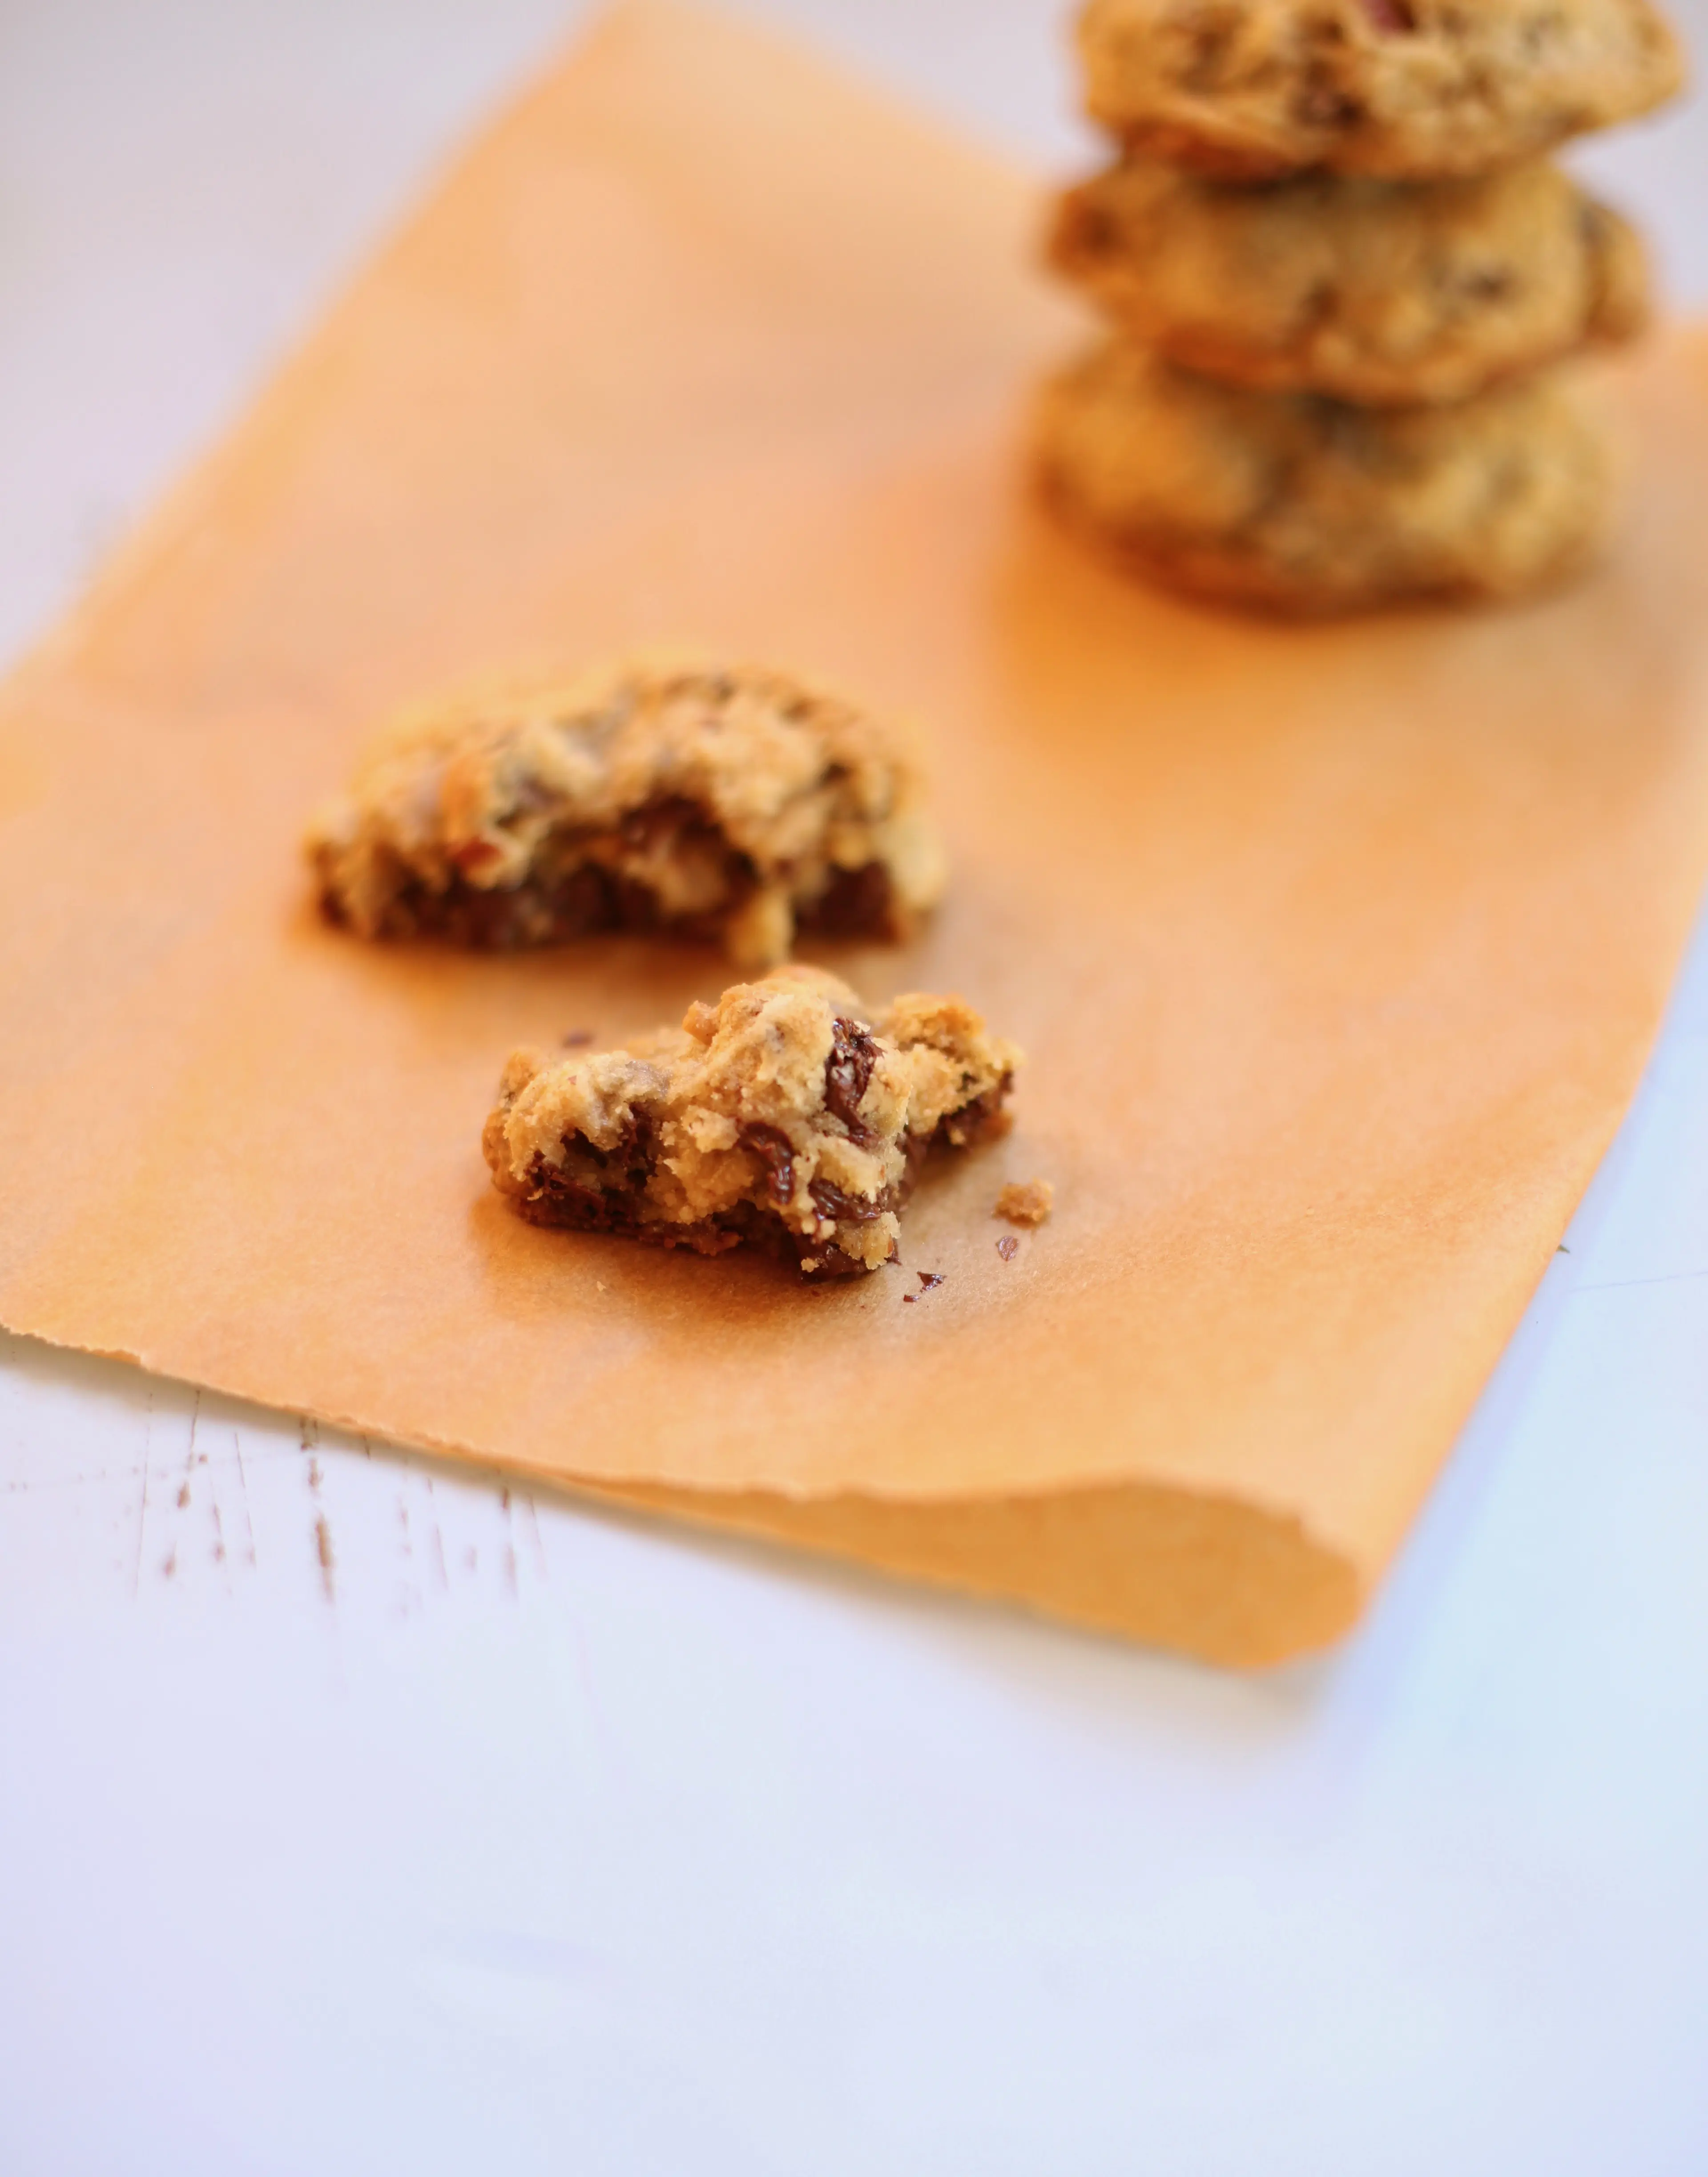 One Favorite Chocolate Chip Cookie broken in half on a piece of natural parchment paper